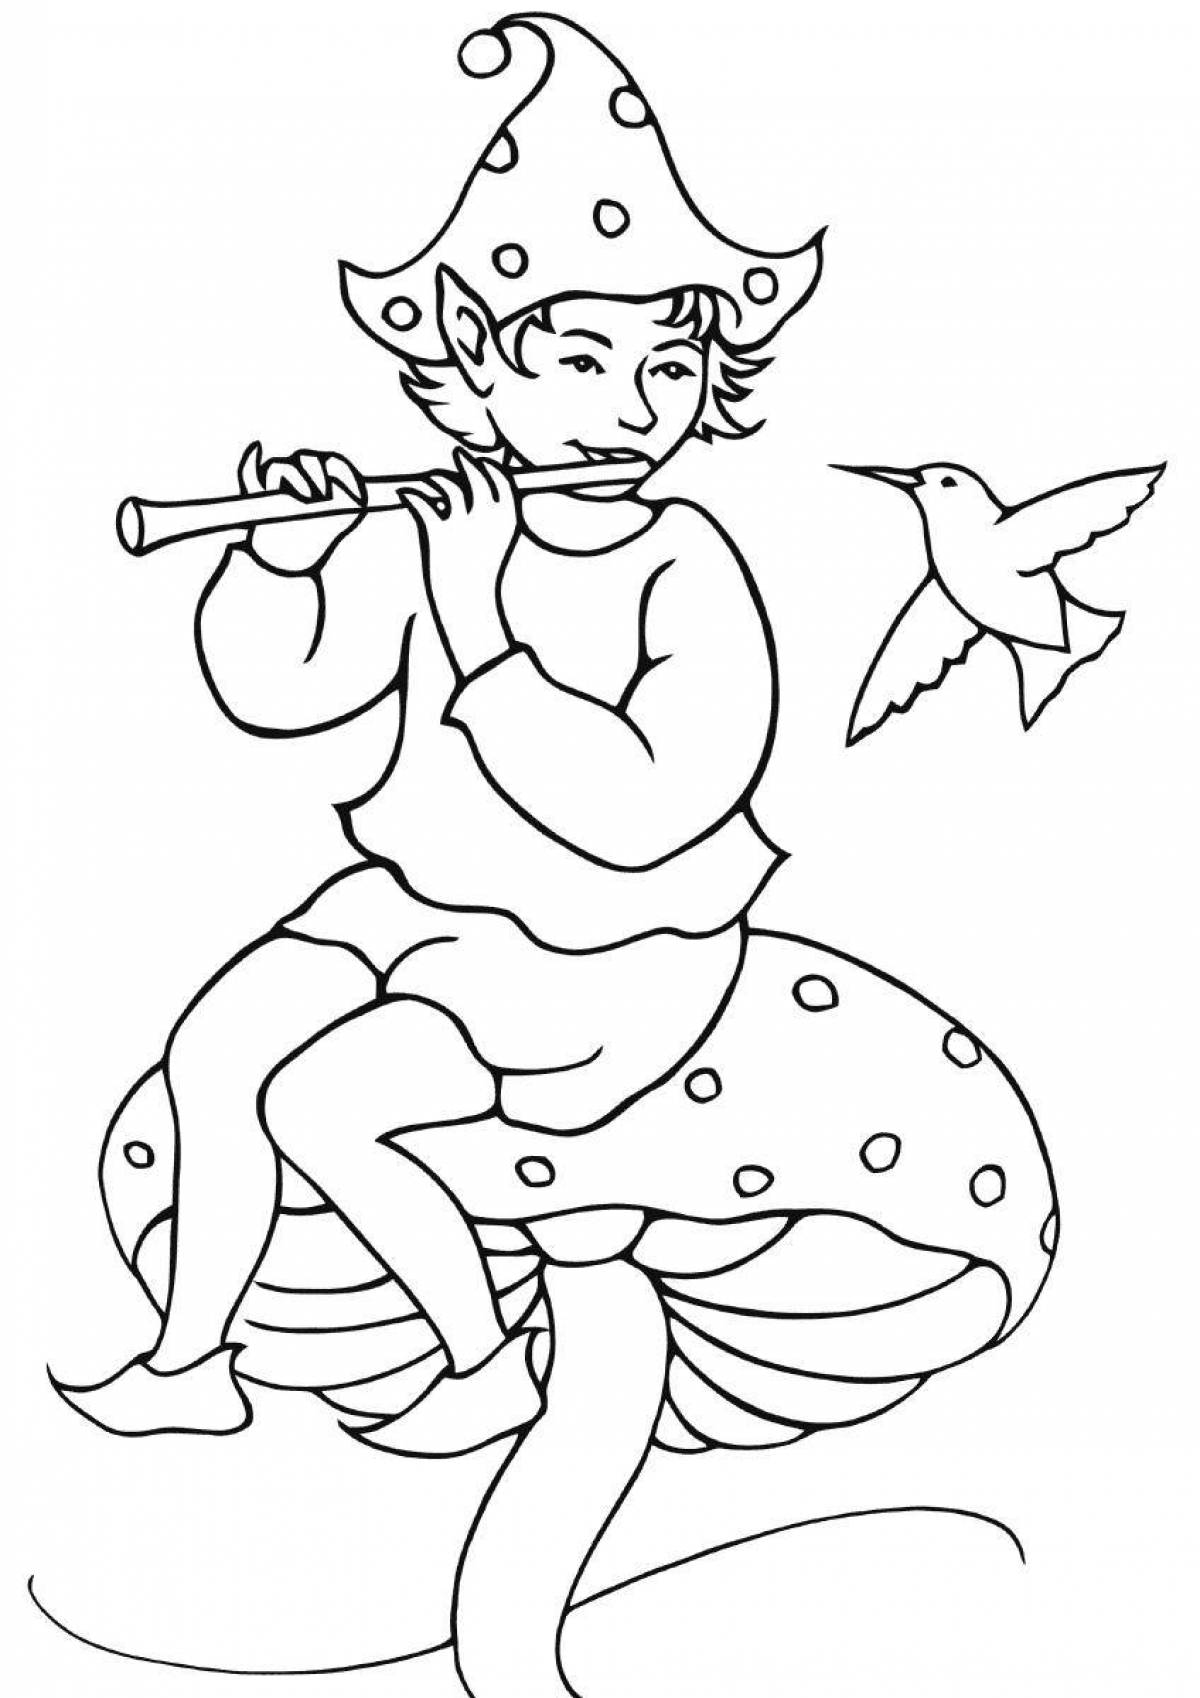 Coloring page magnificent flute and jug